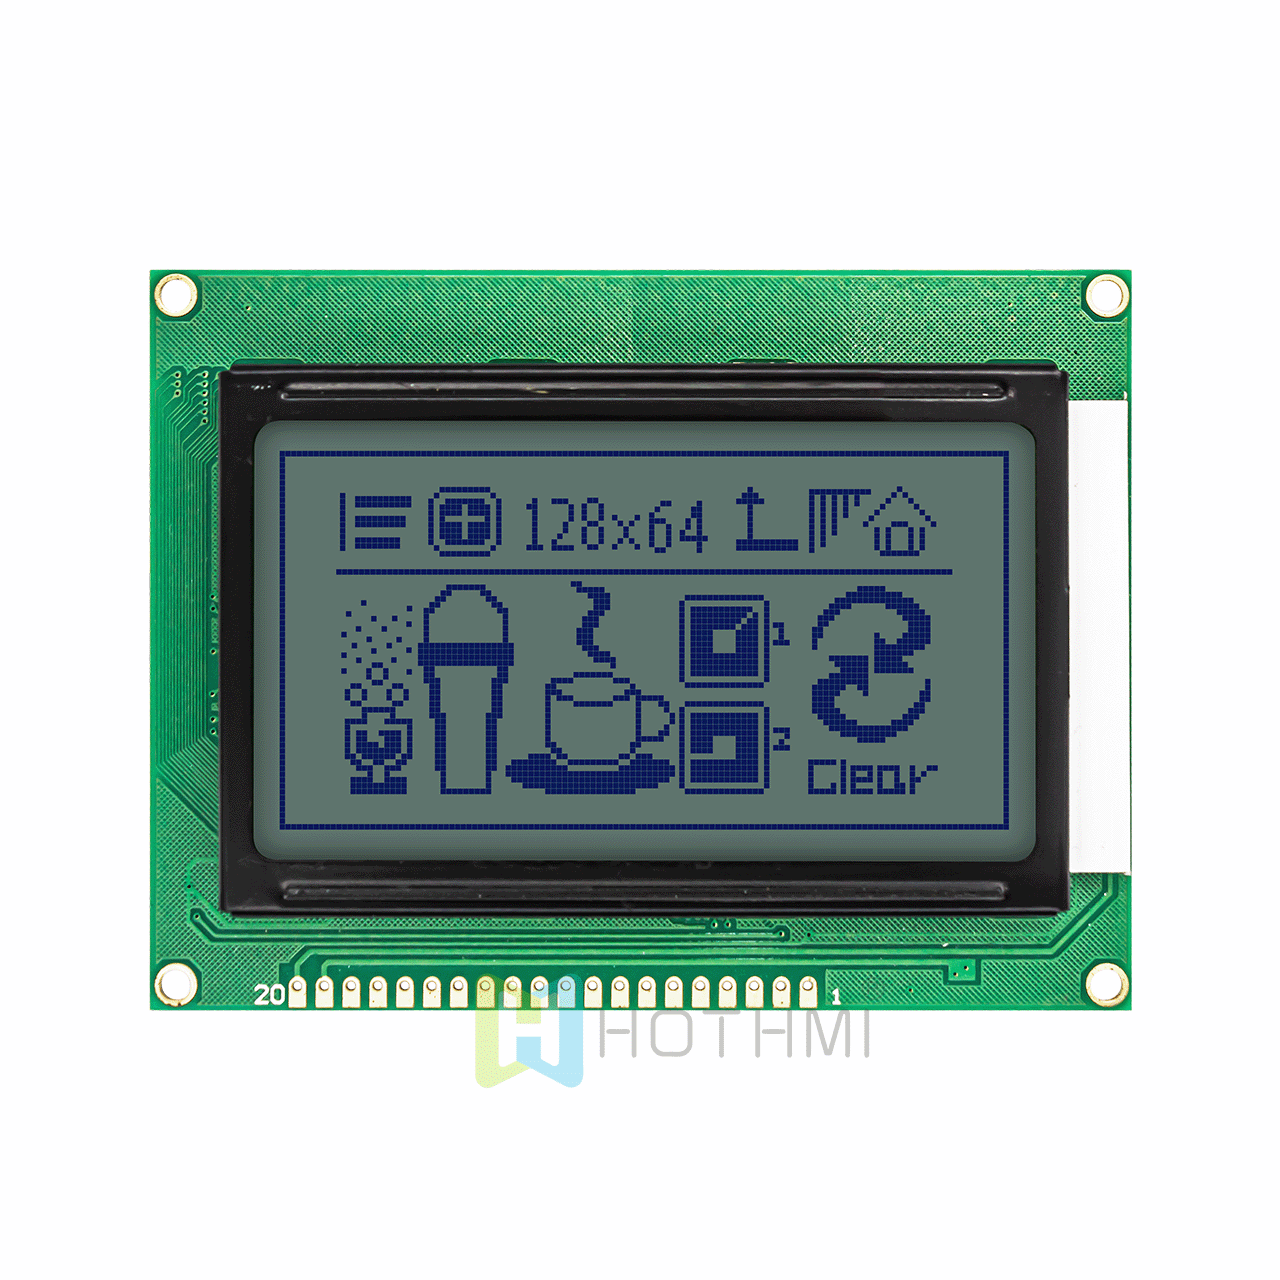 3.2-inch low-costwhite backlight | 128x64 graphic LCD module | ST7920 | MCU interface | for Arduino